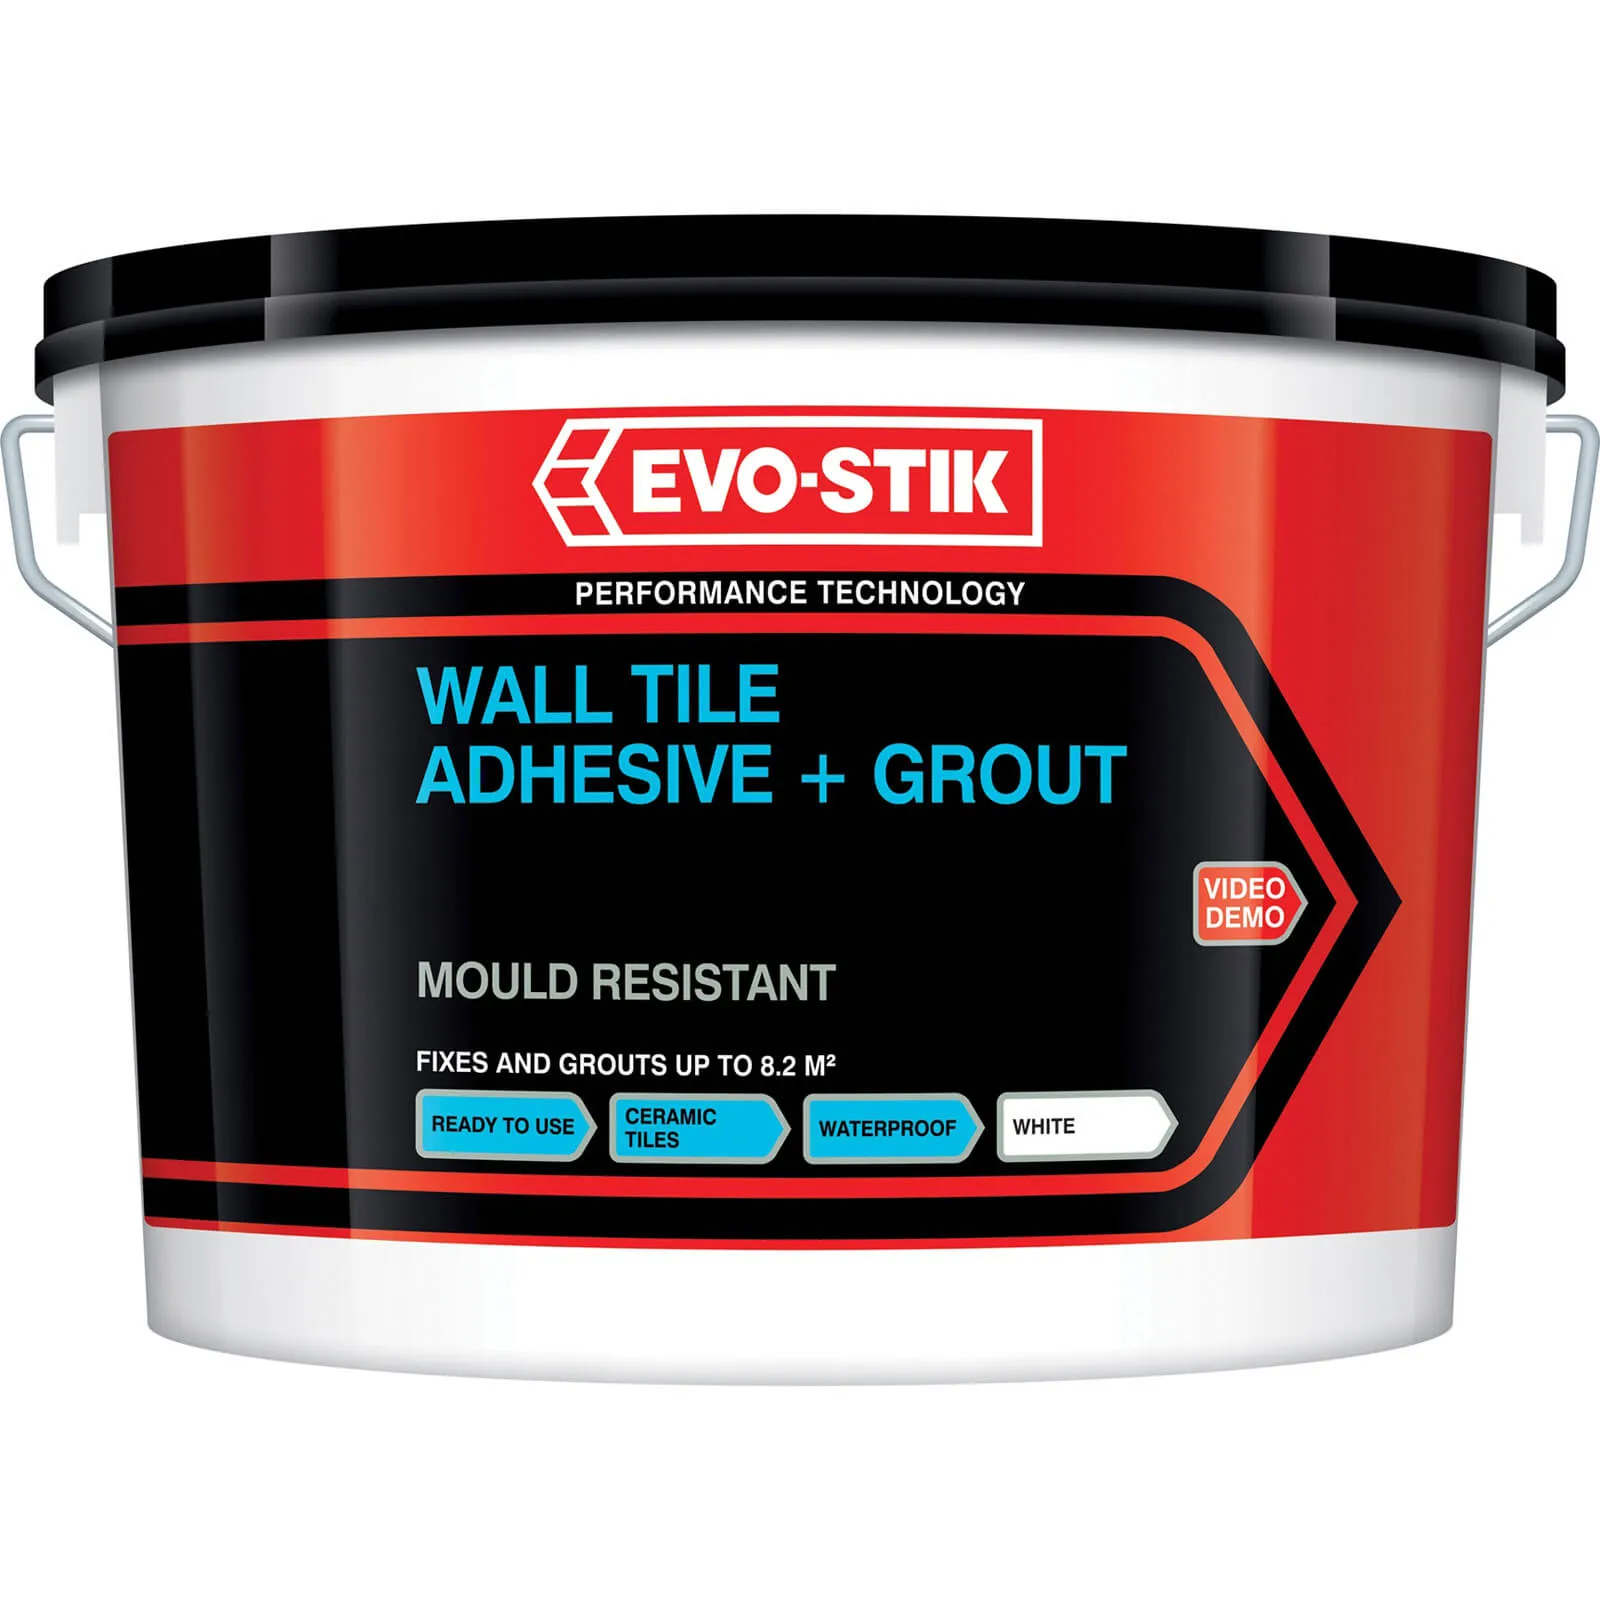 Evo-stik Tile A Wall Tile Adhesive and Grout - 5l